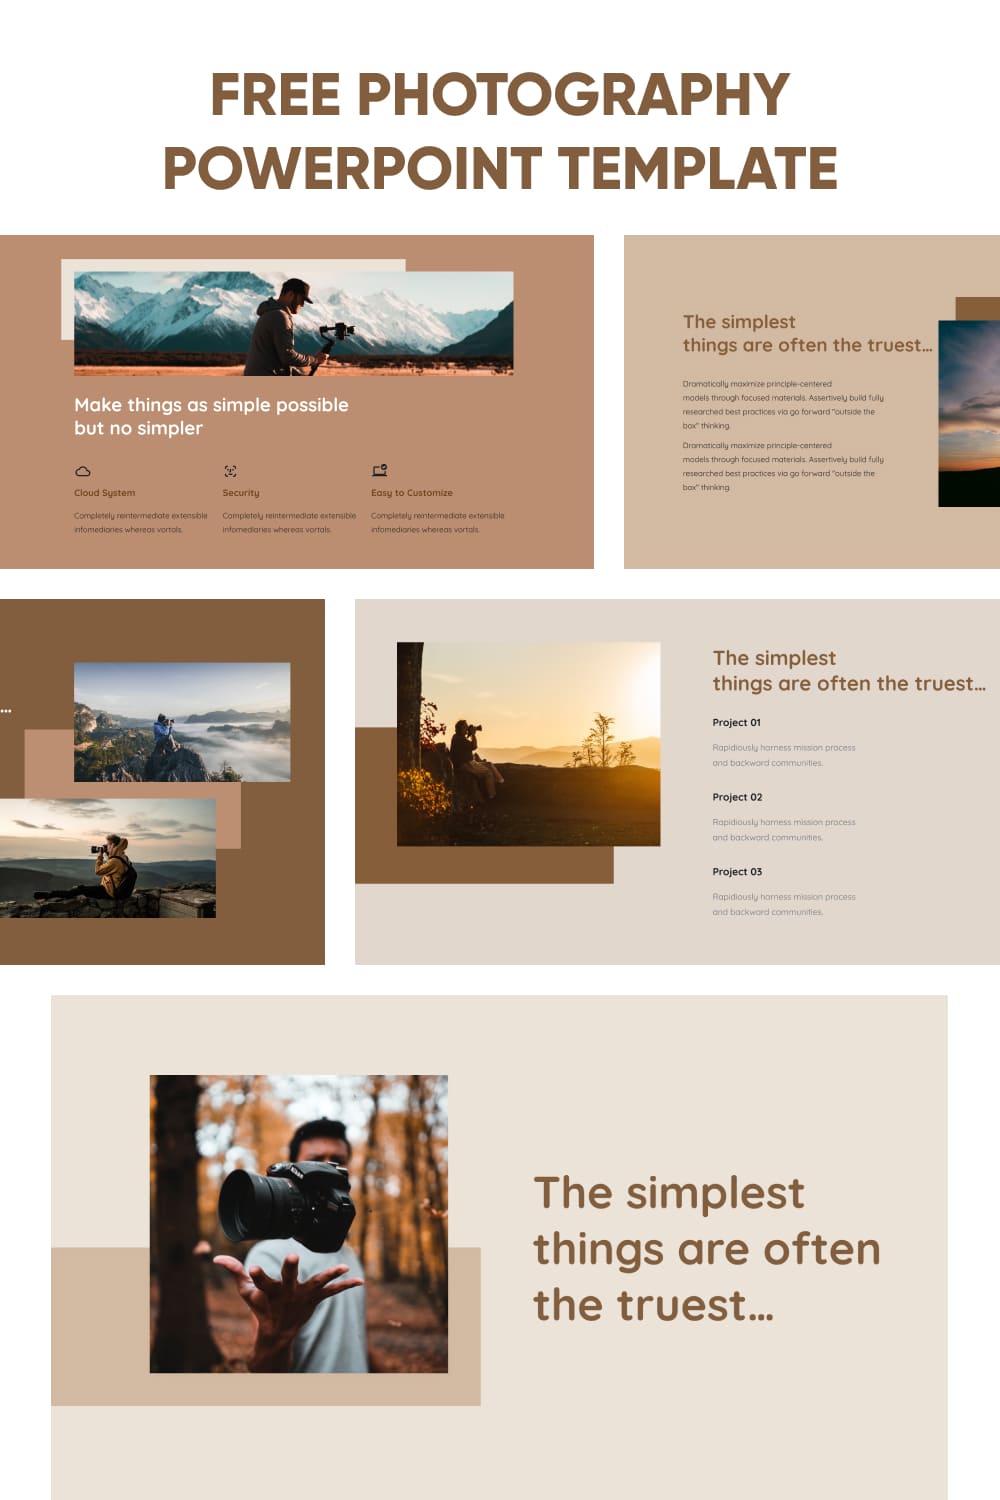 Free Photography Powerpoint Template Pinterest.